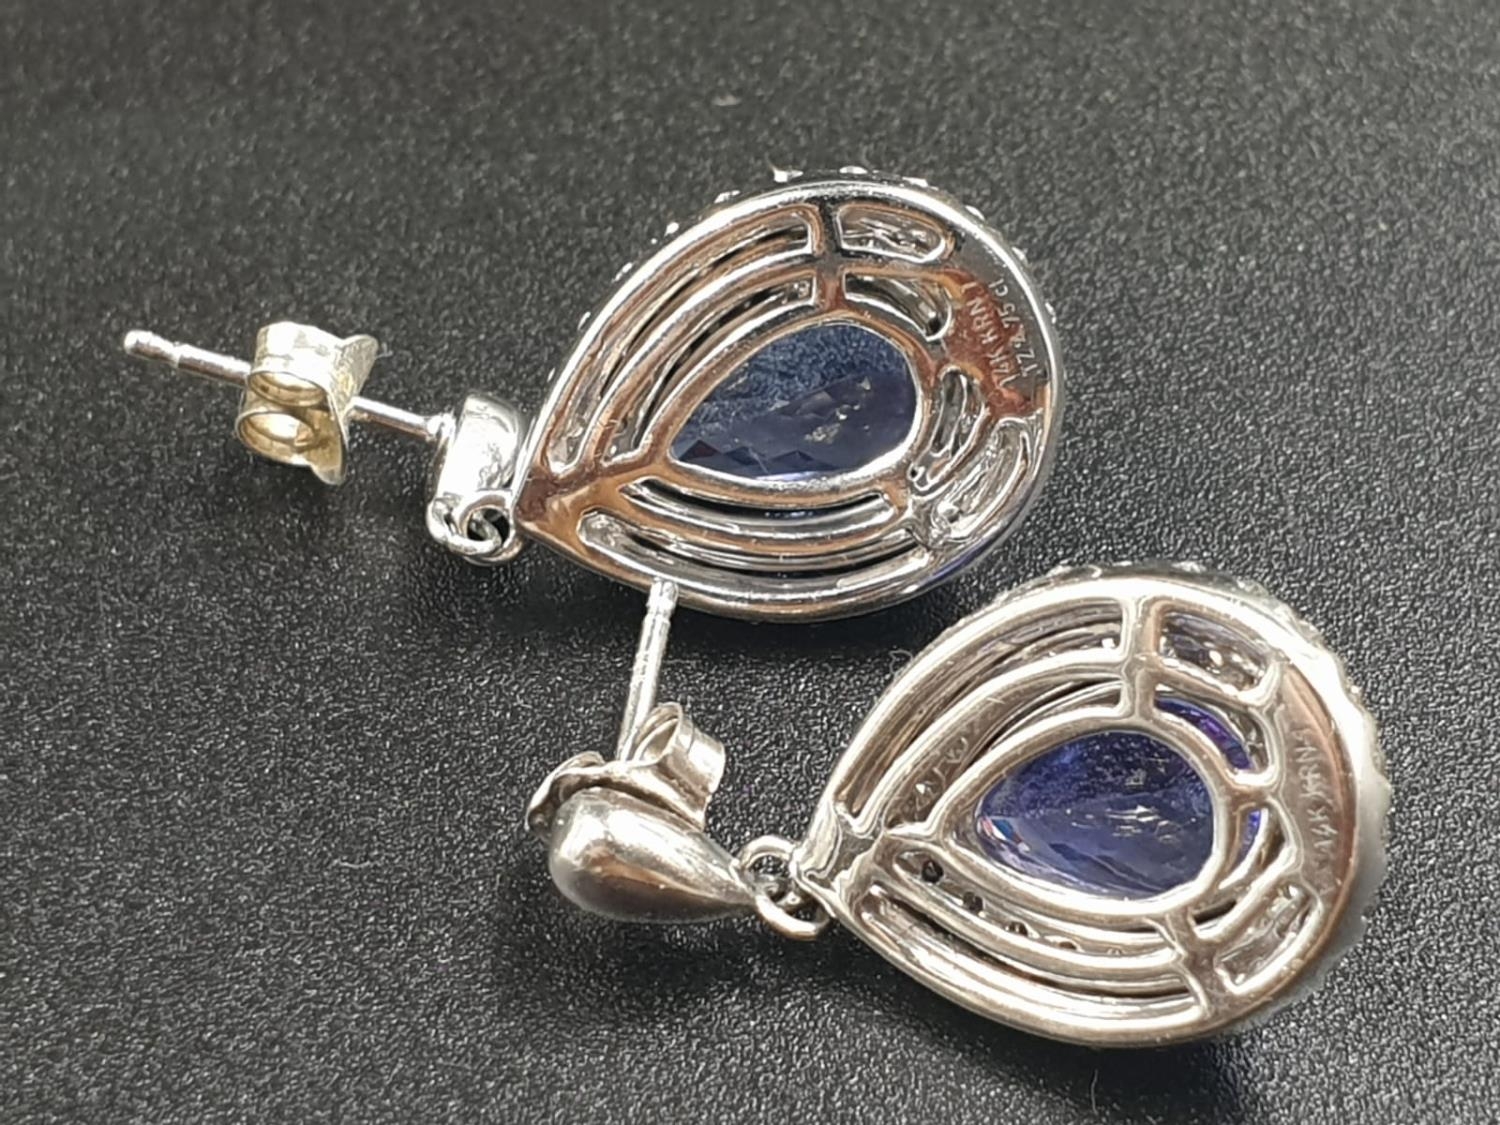 A 14CT WHITE GOLD MATCHING SET OF EARRINGS AND DRESS RING WITH LARGE PEAR SHAPED TANZANITE STONES - Image 12 of 14